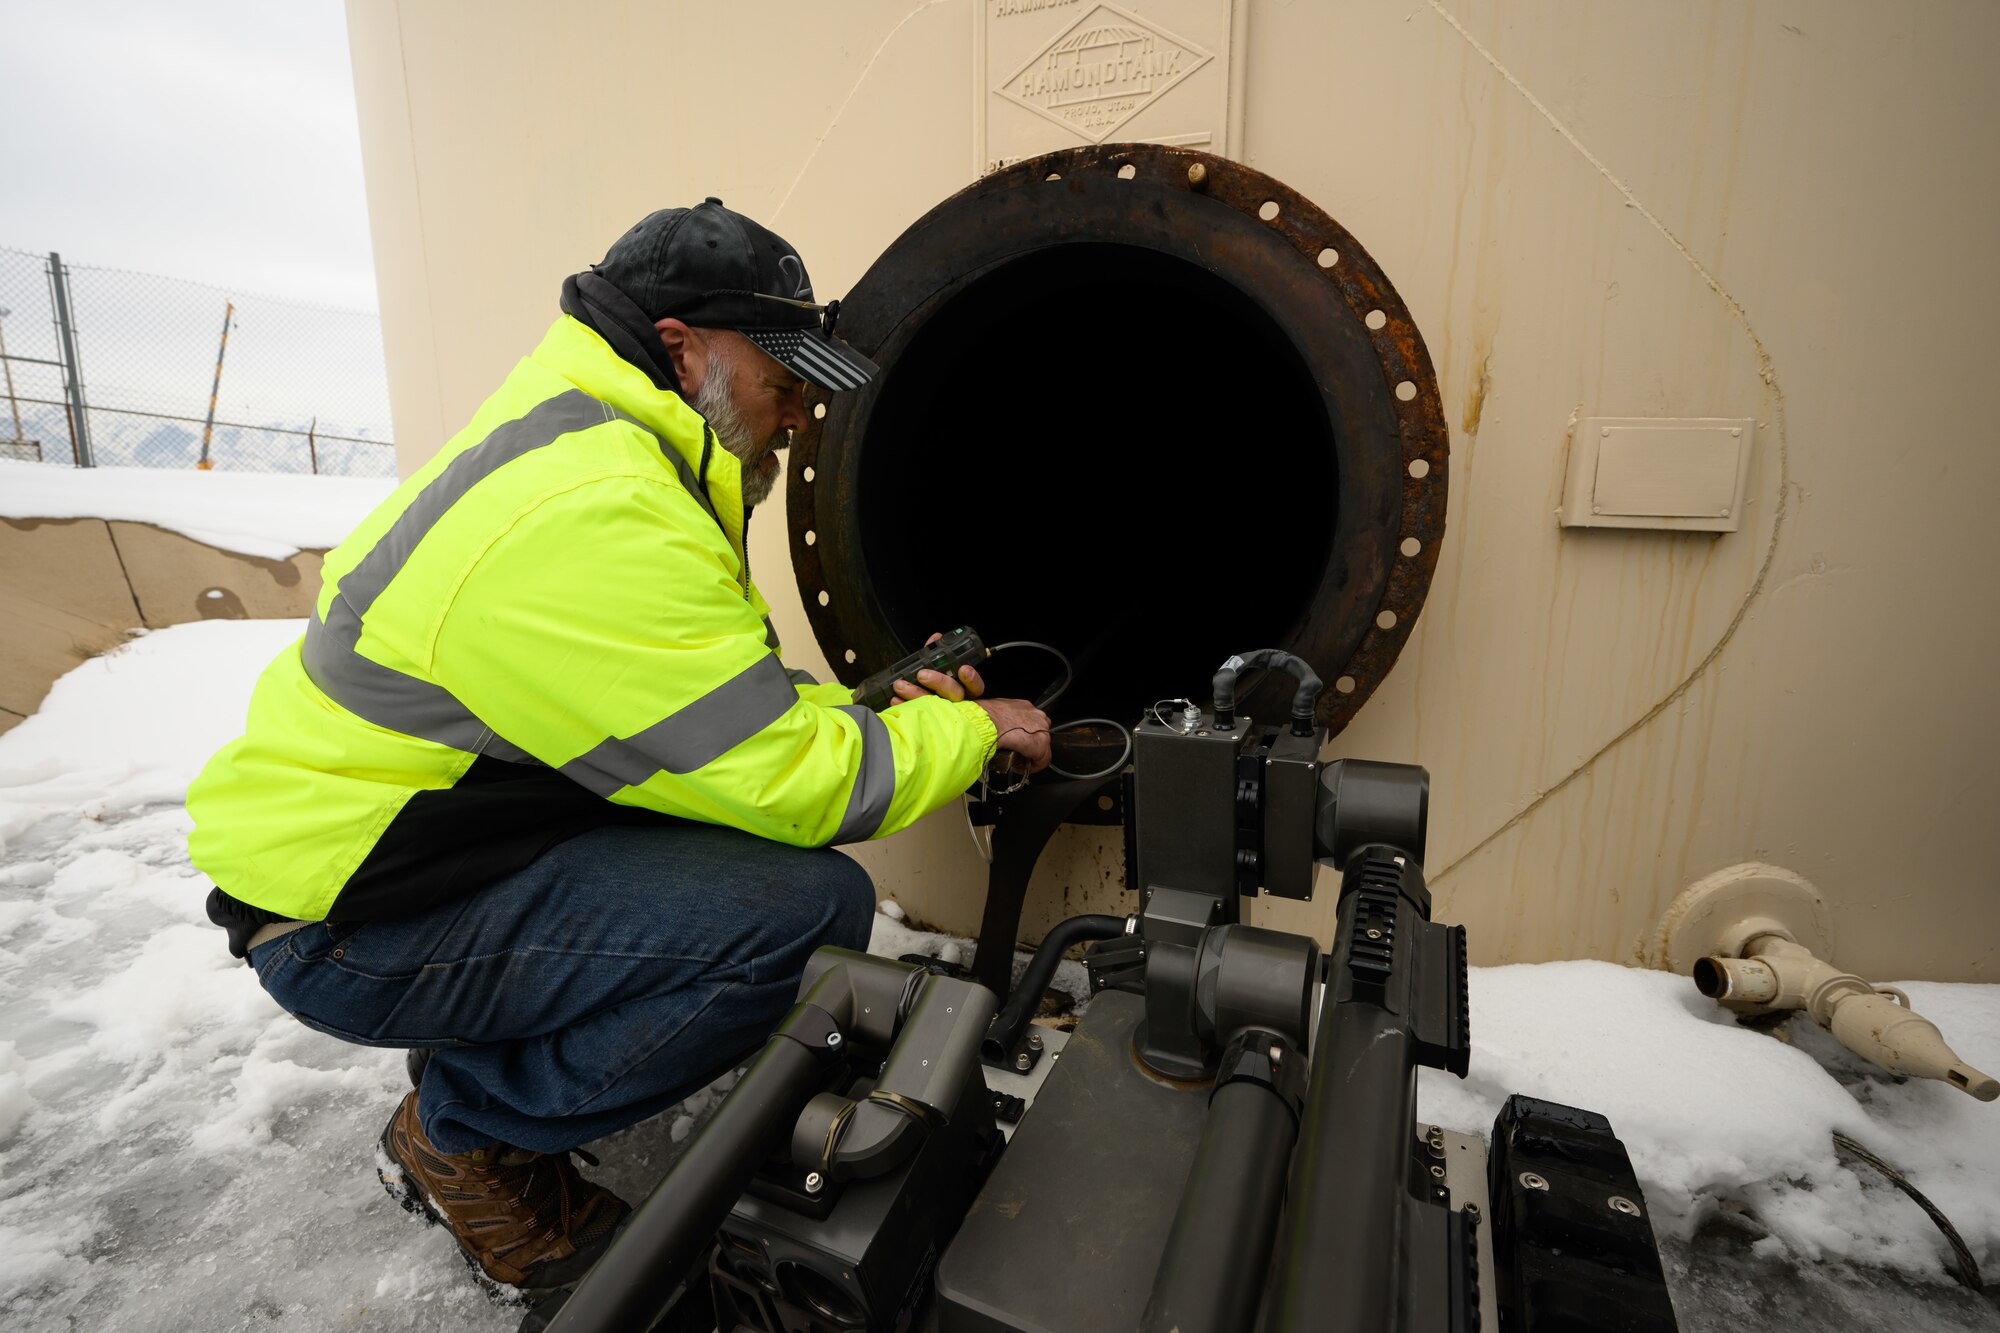 A civilian worker inserts a probe into a fuel tank